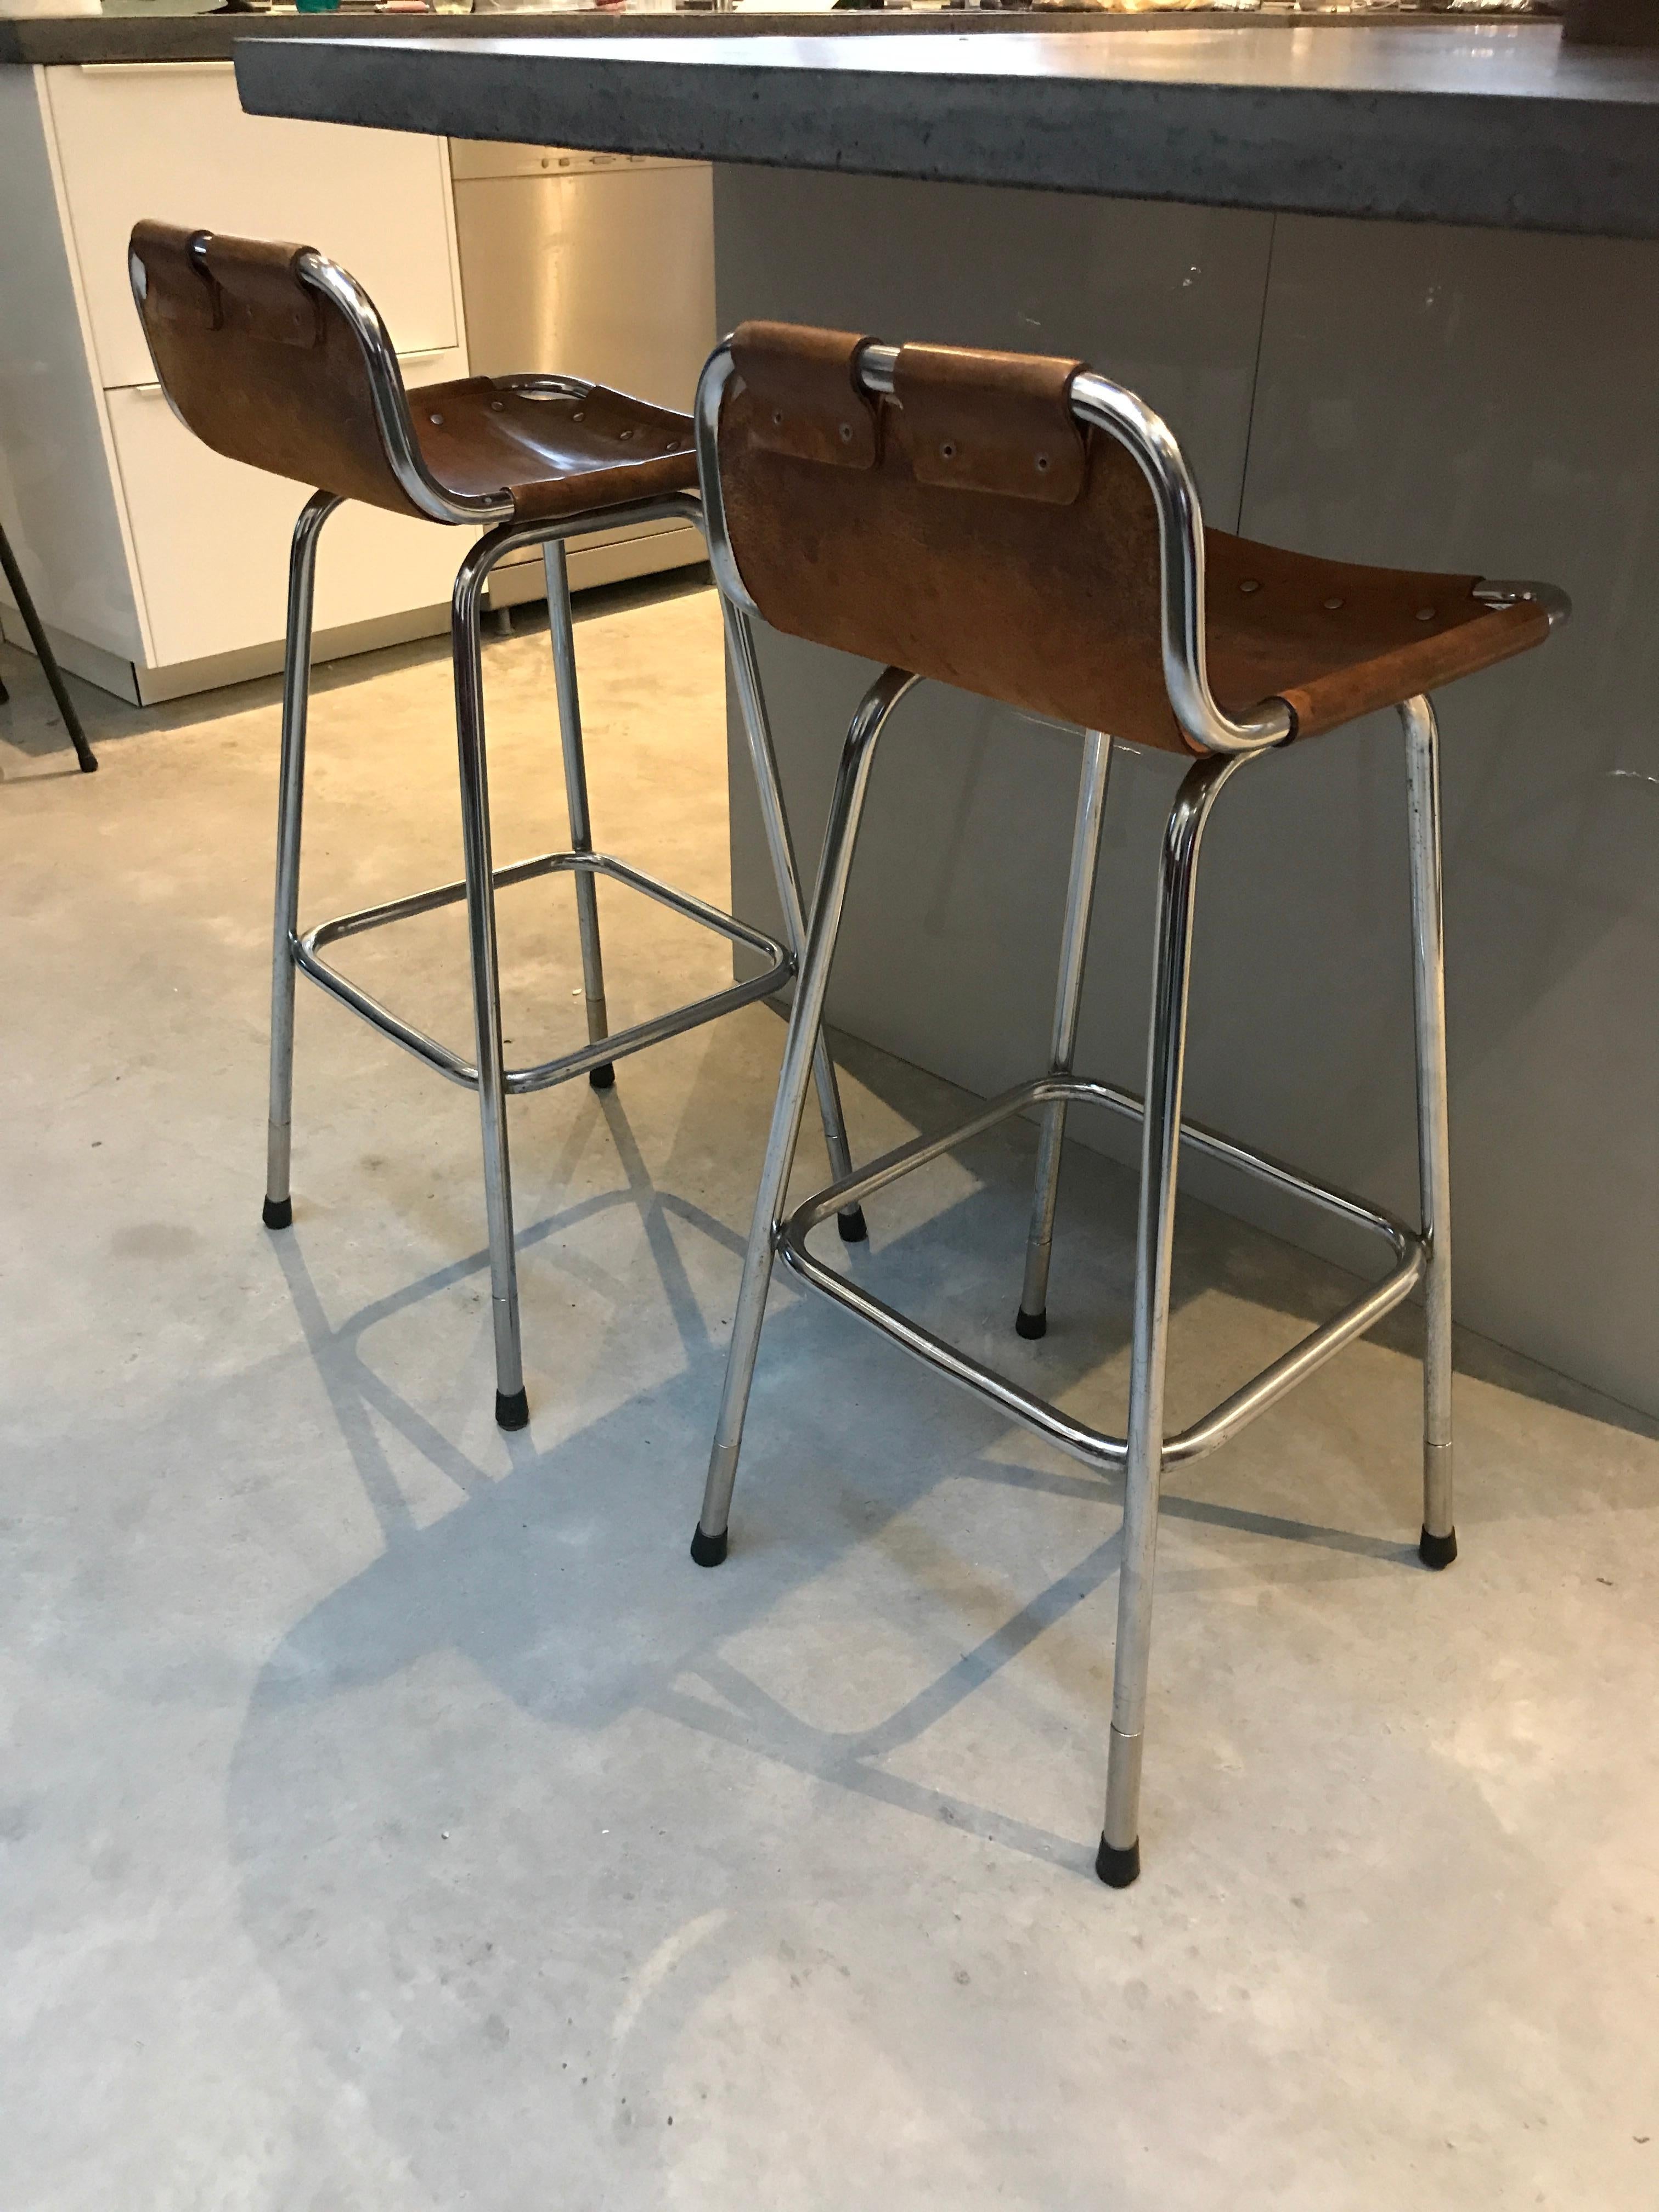 Two High Bar Stools Selected by Charlotte Perriand for the Les Arcs Ski Resort 1